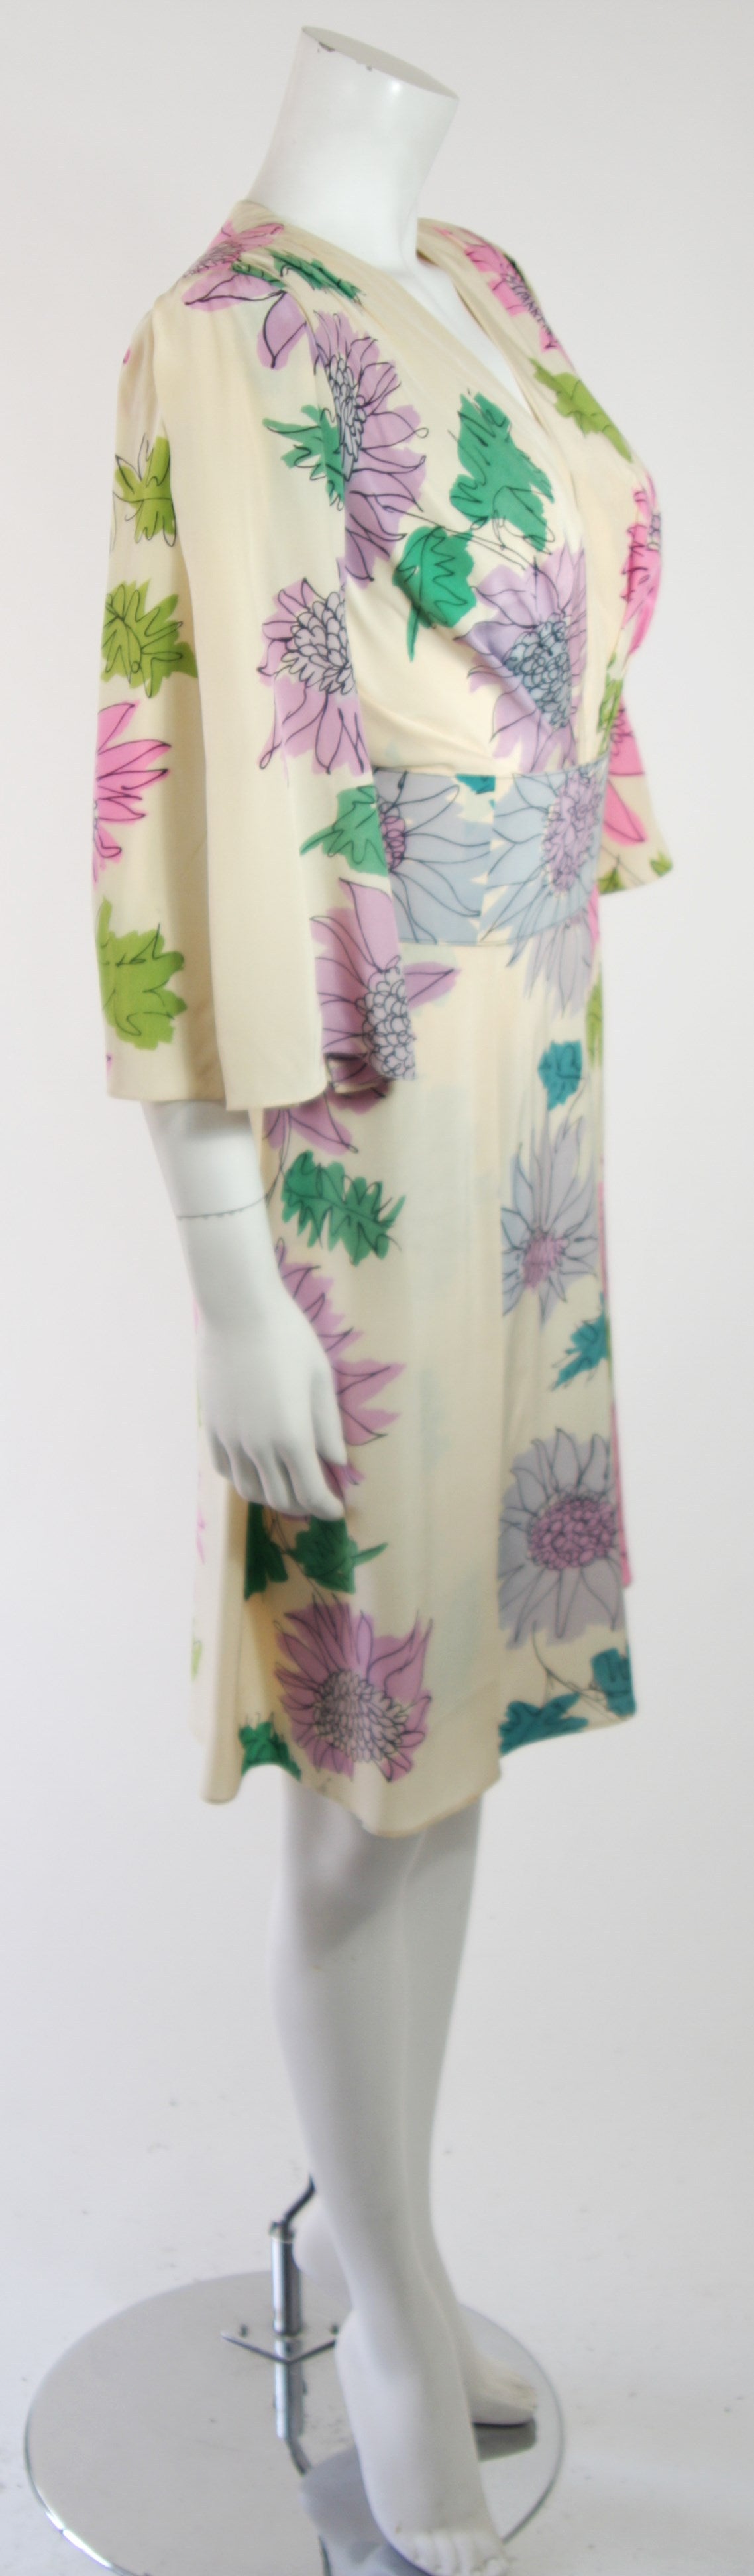 Leon Paule for Nolan Miller Silk Watercolor Dress with Cascades Size Small 1